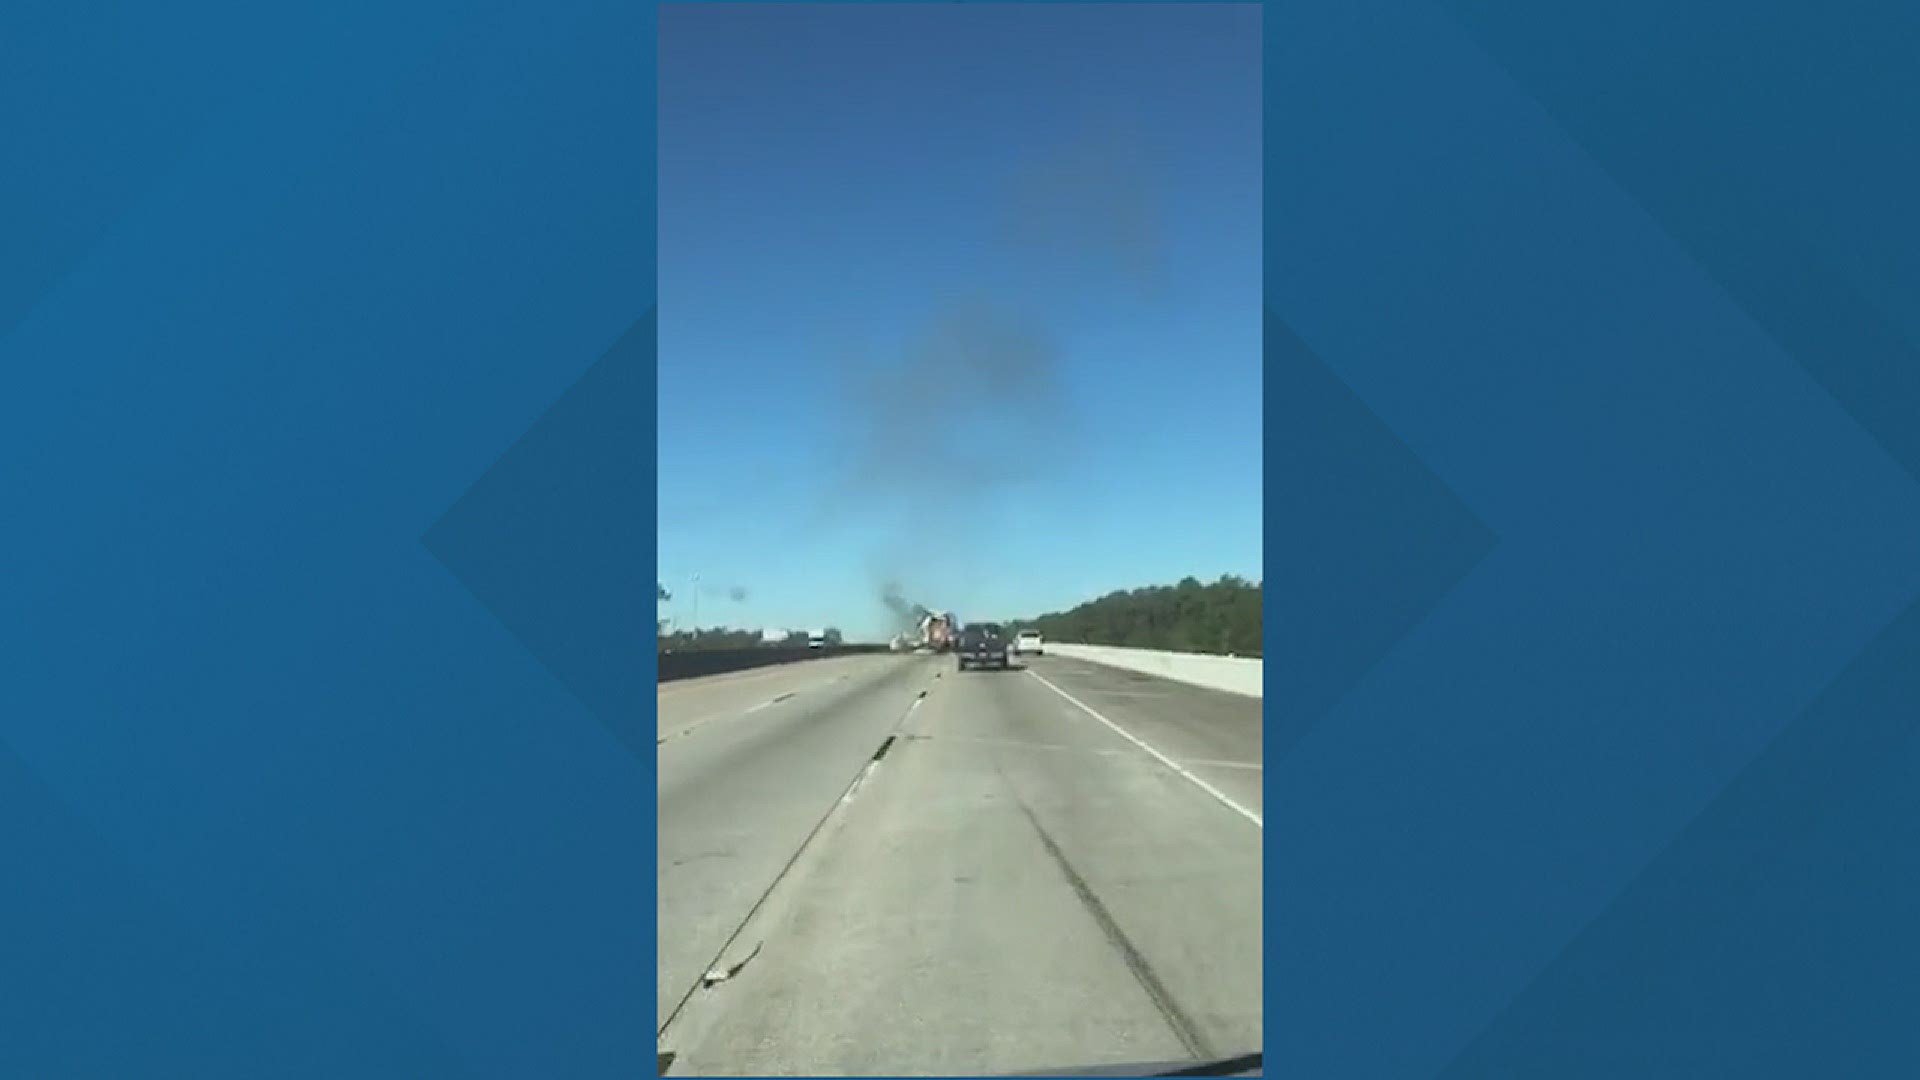 A trucker driver has been killed in a fiery wreck along Interstate 10 in Orange County Wednesday morning.